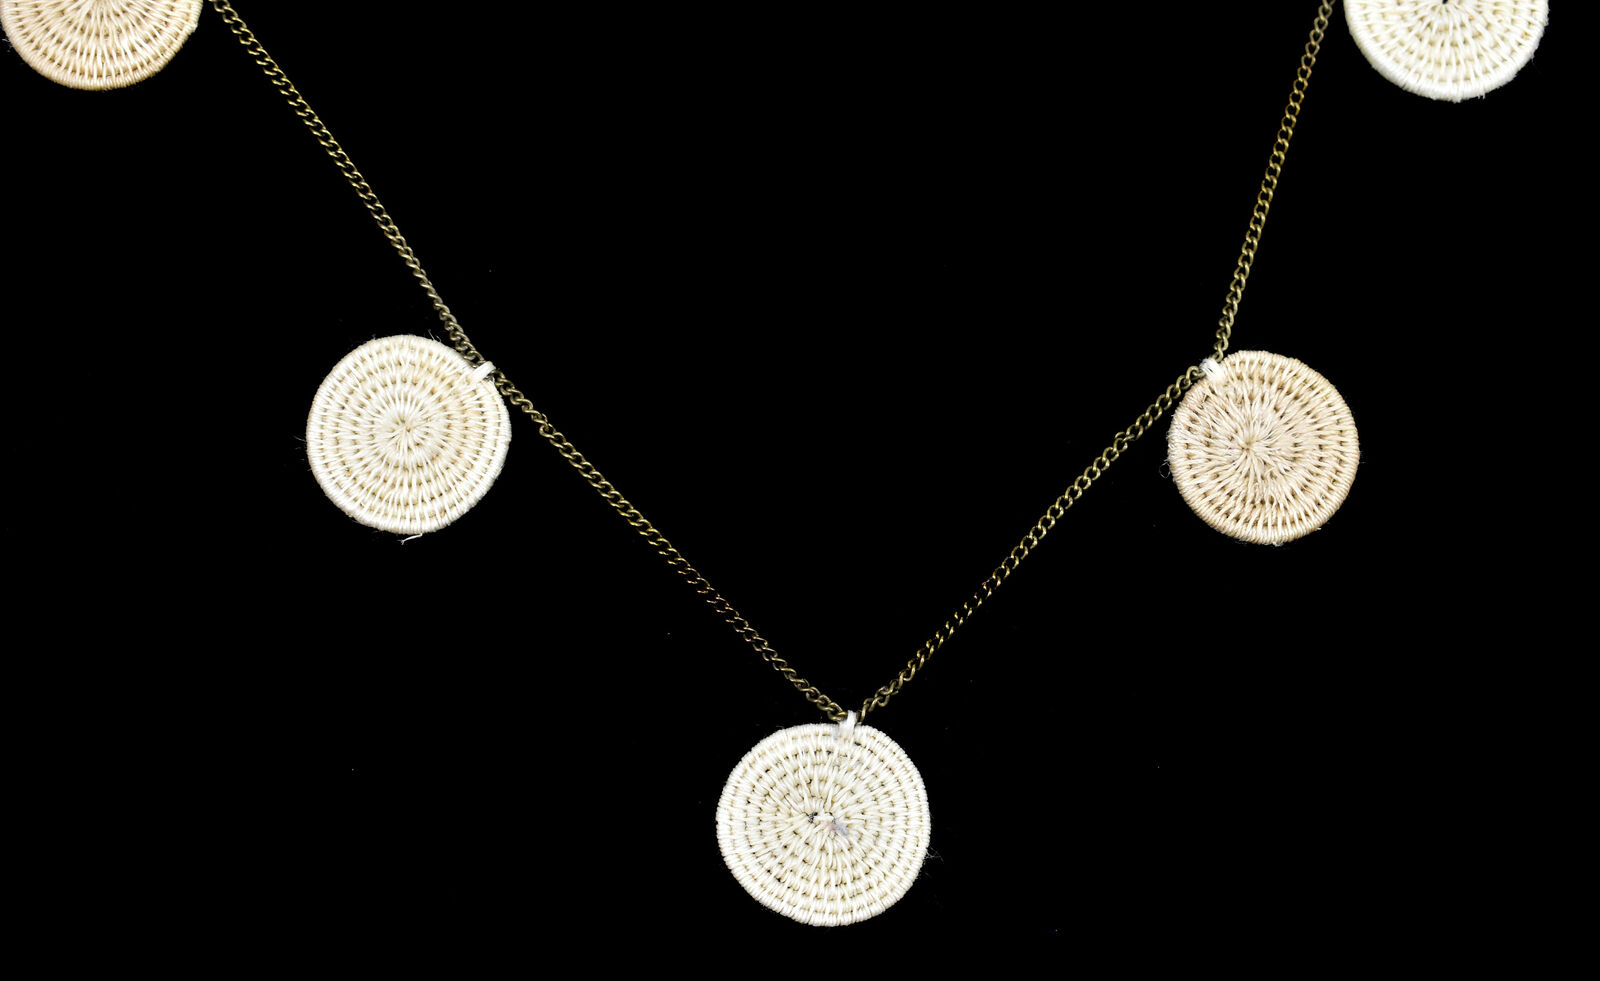 Swazi Necklace Woven Round Basket Pendants African Sale Was $45.00